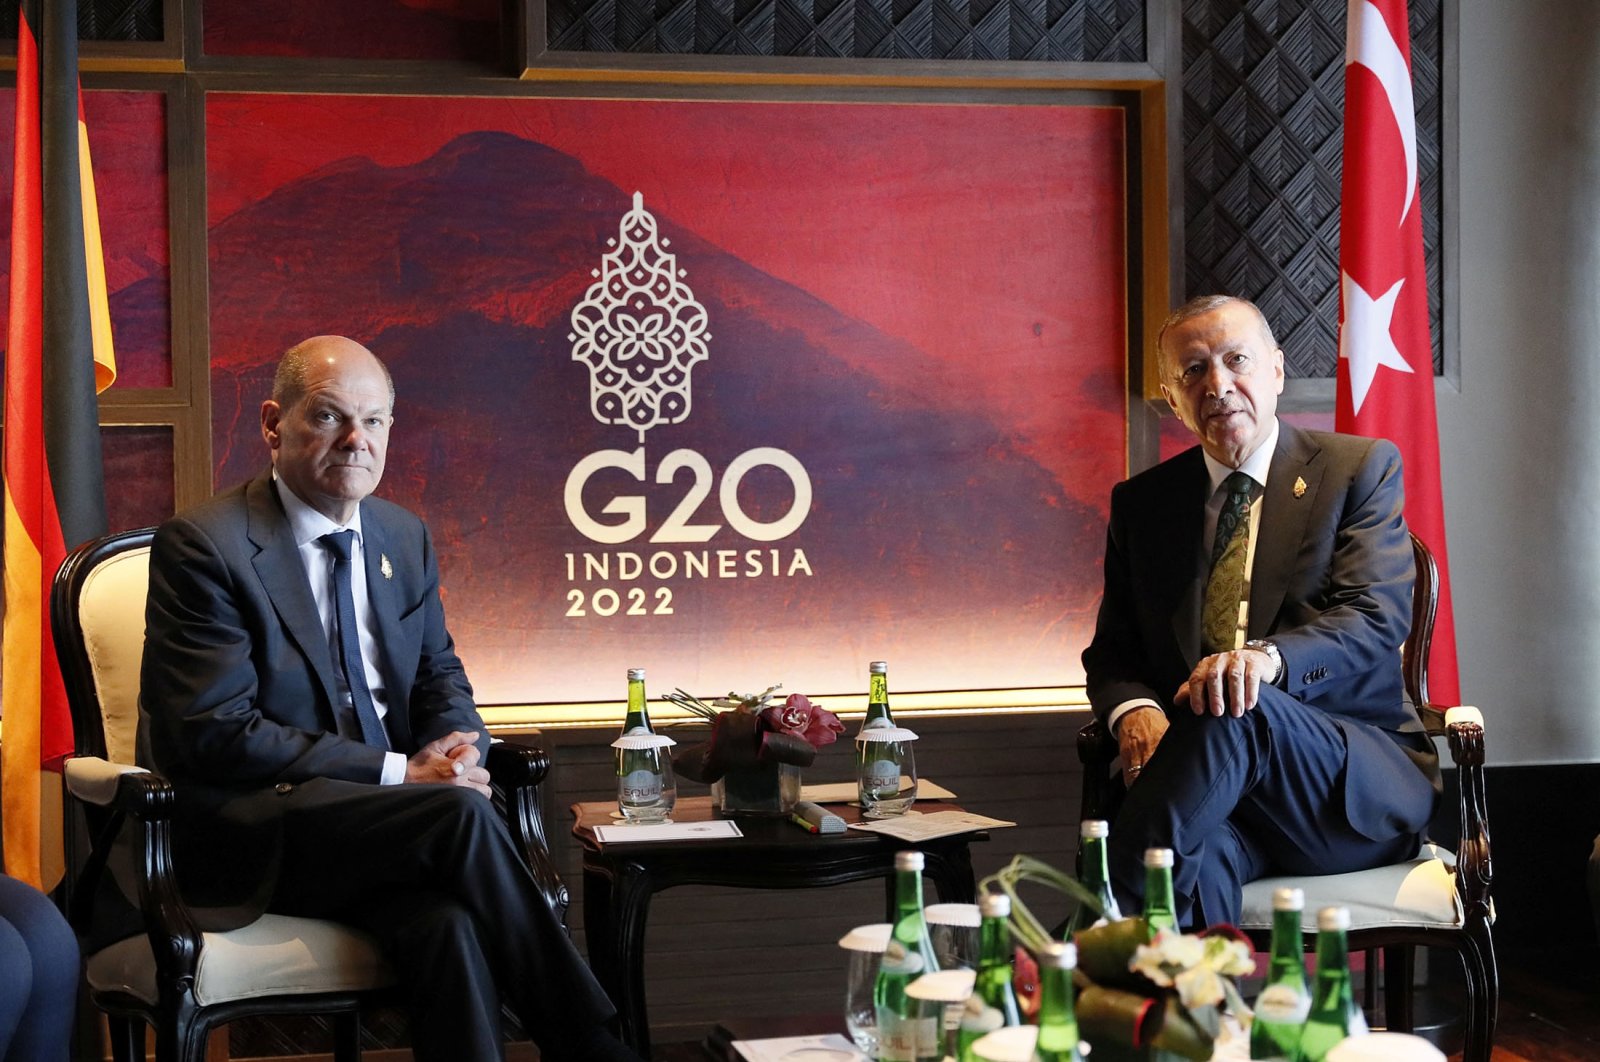 German Chancellor Olaf Scholz (L) and Turkish President Recep Tayyip Erdoğan attend a bilateral meeting on the sideline of the G20 Leaders&#039; Summit in Bali, Indonesia, Nov. 16, 2022. (Reuters Photo)